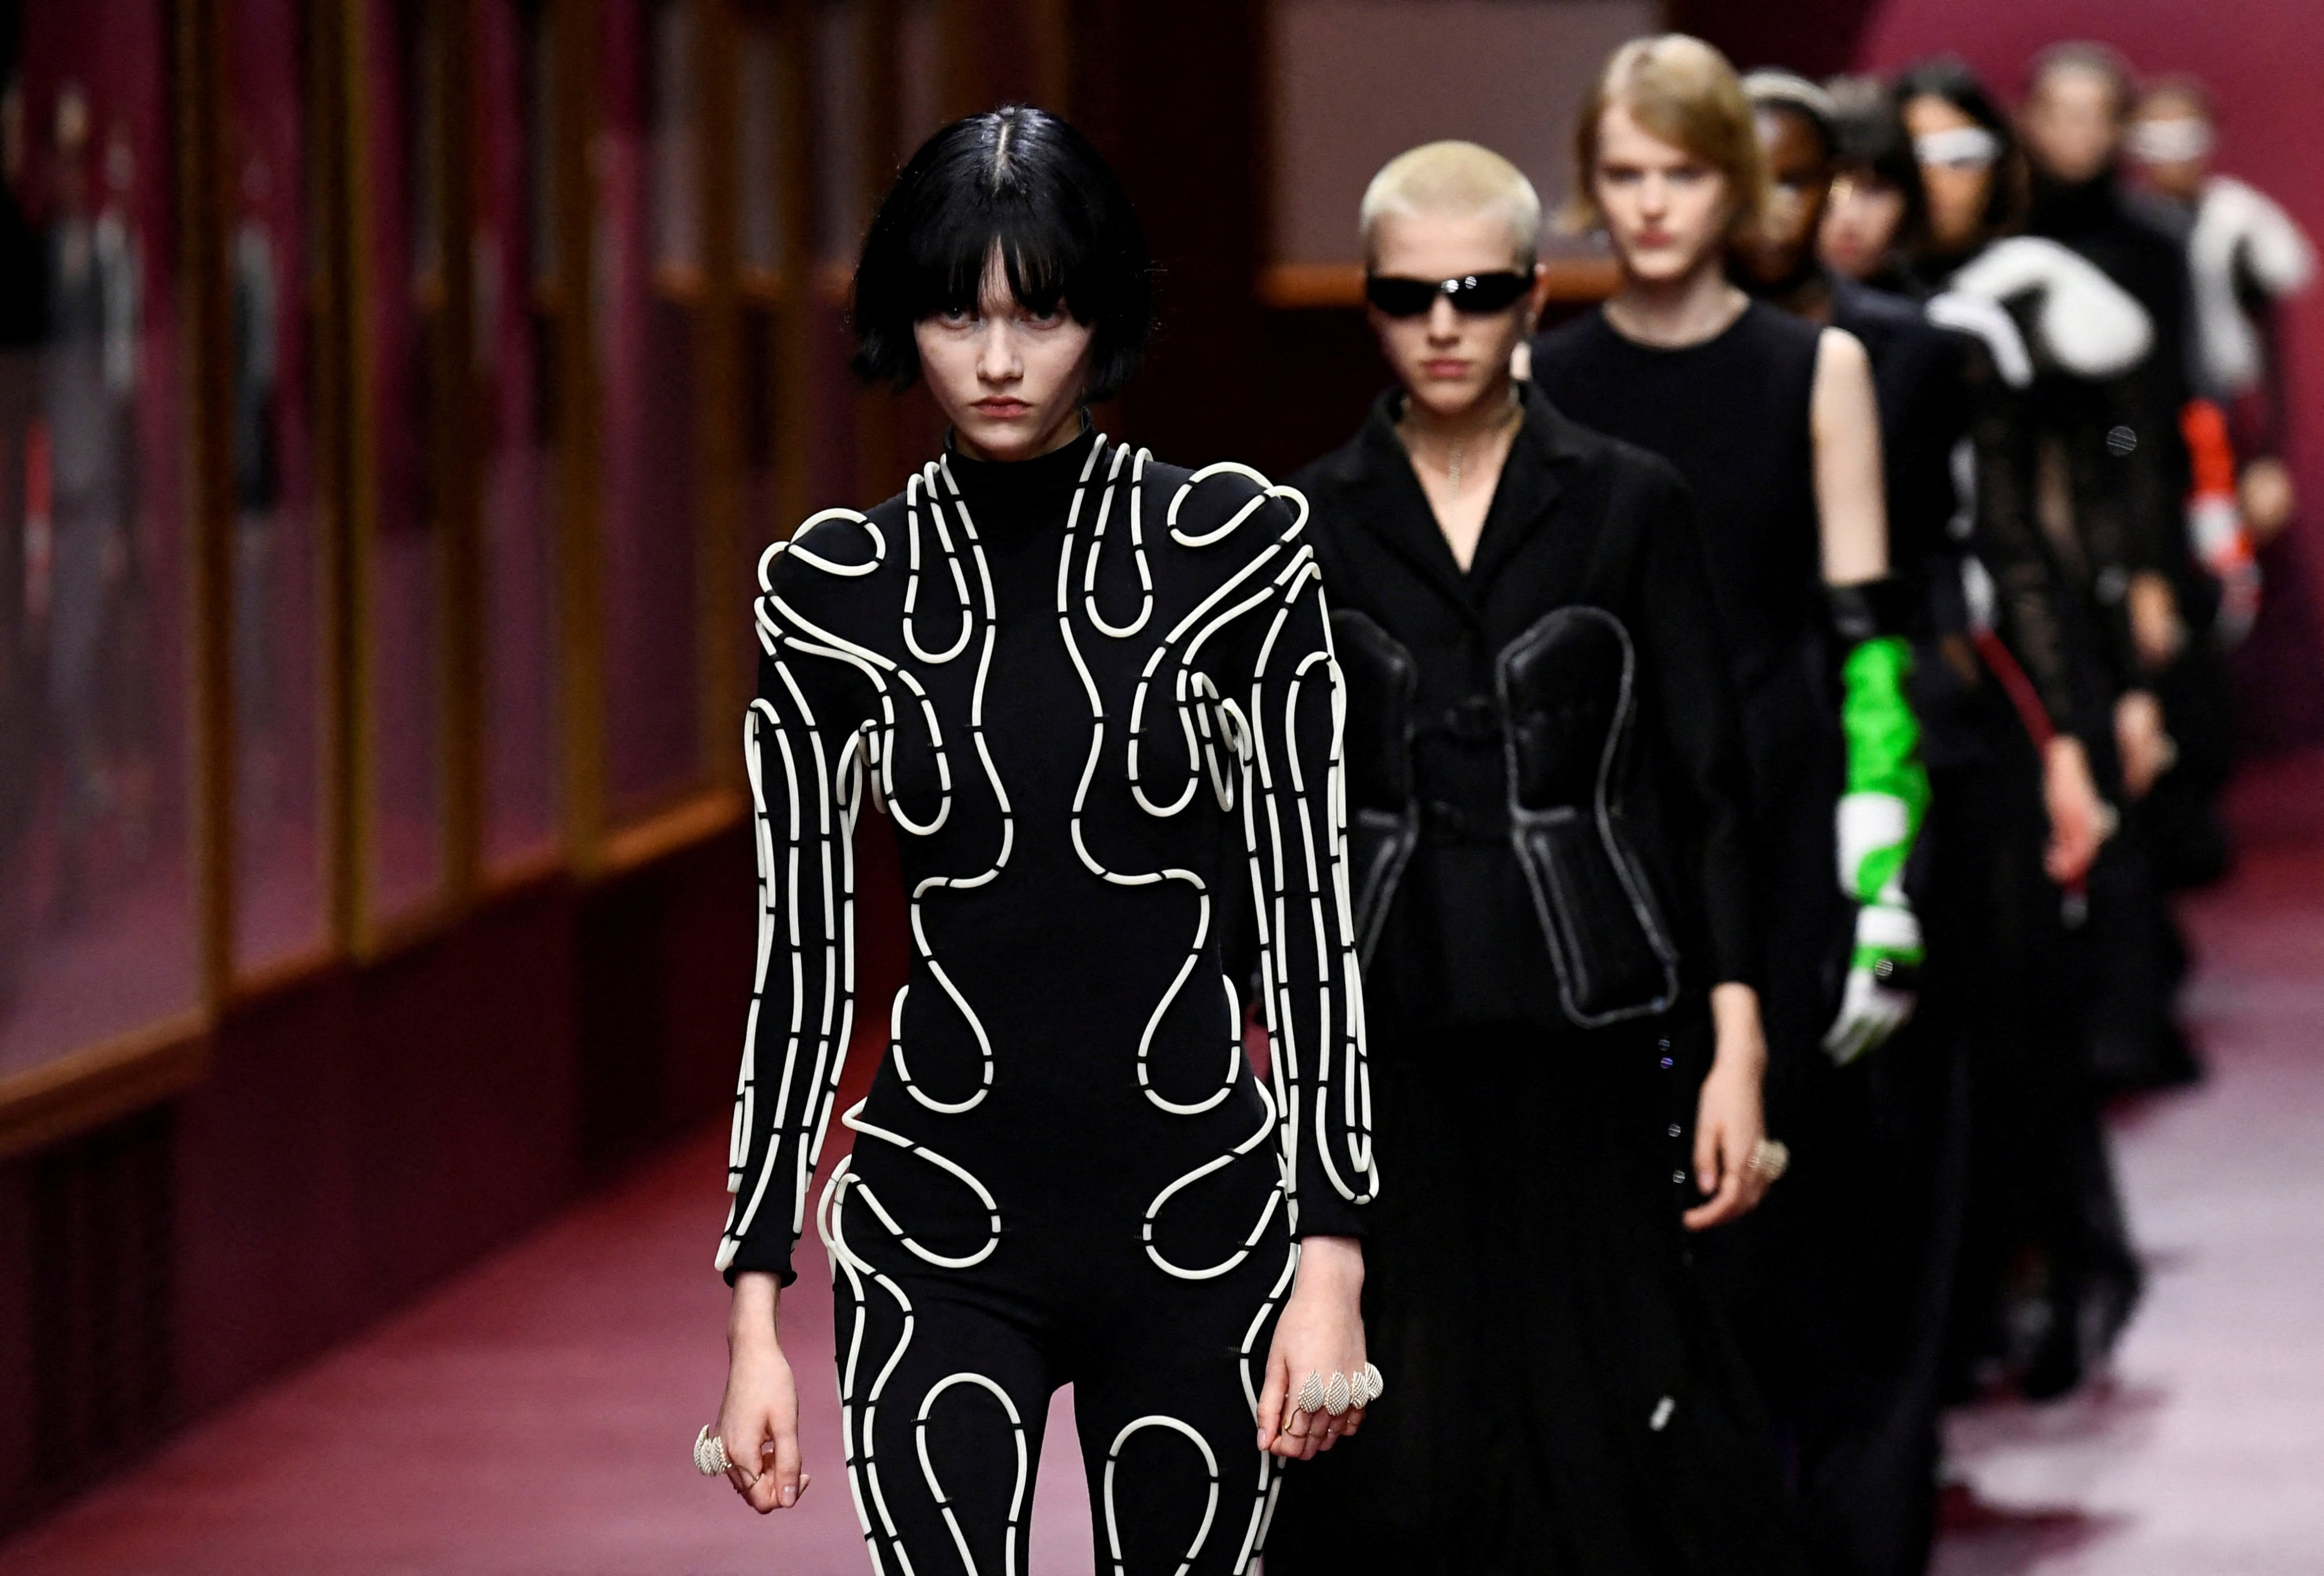 Paris Fashion Week 2022: Virgil Abloh's final Off-White show was a  bittersweet celebration of 'Spaceship Earth', brought to life by Gigi and  Bella Hadid, Kendall Jenner and Candice Swanepoel